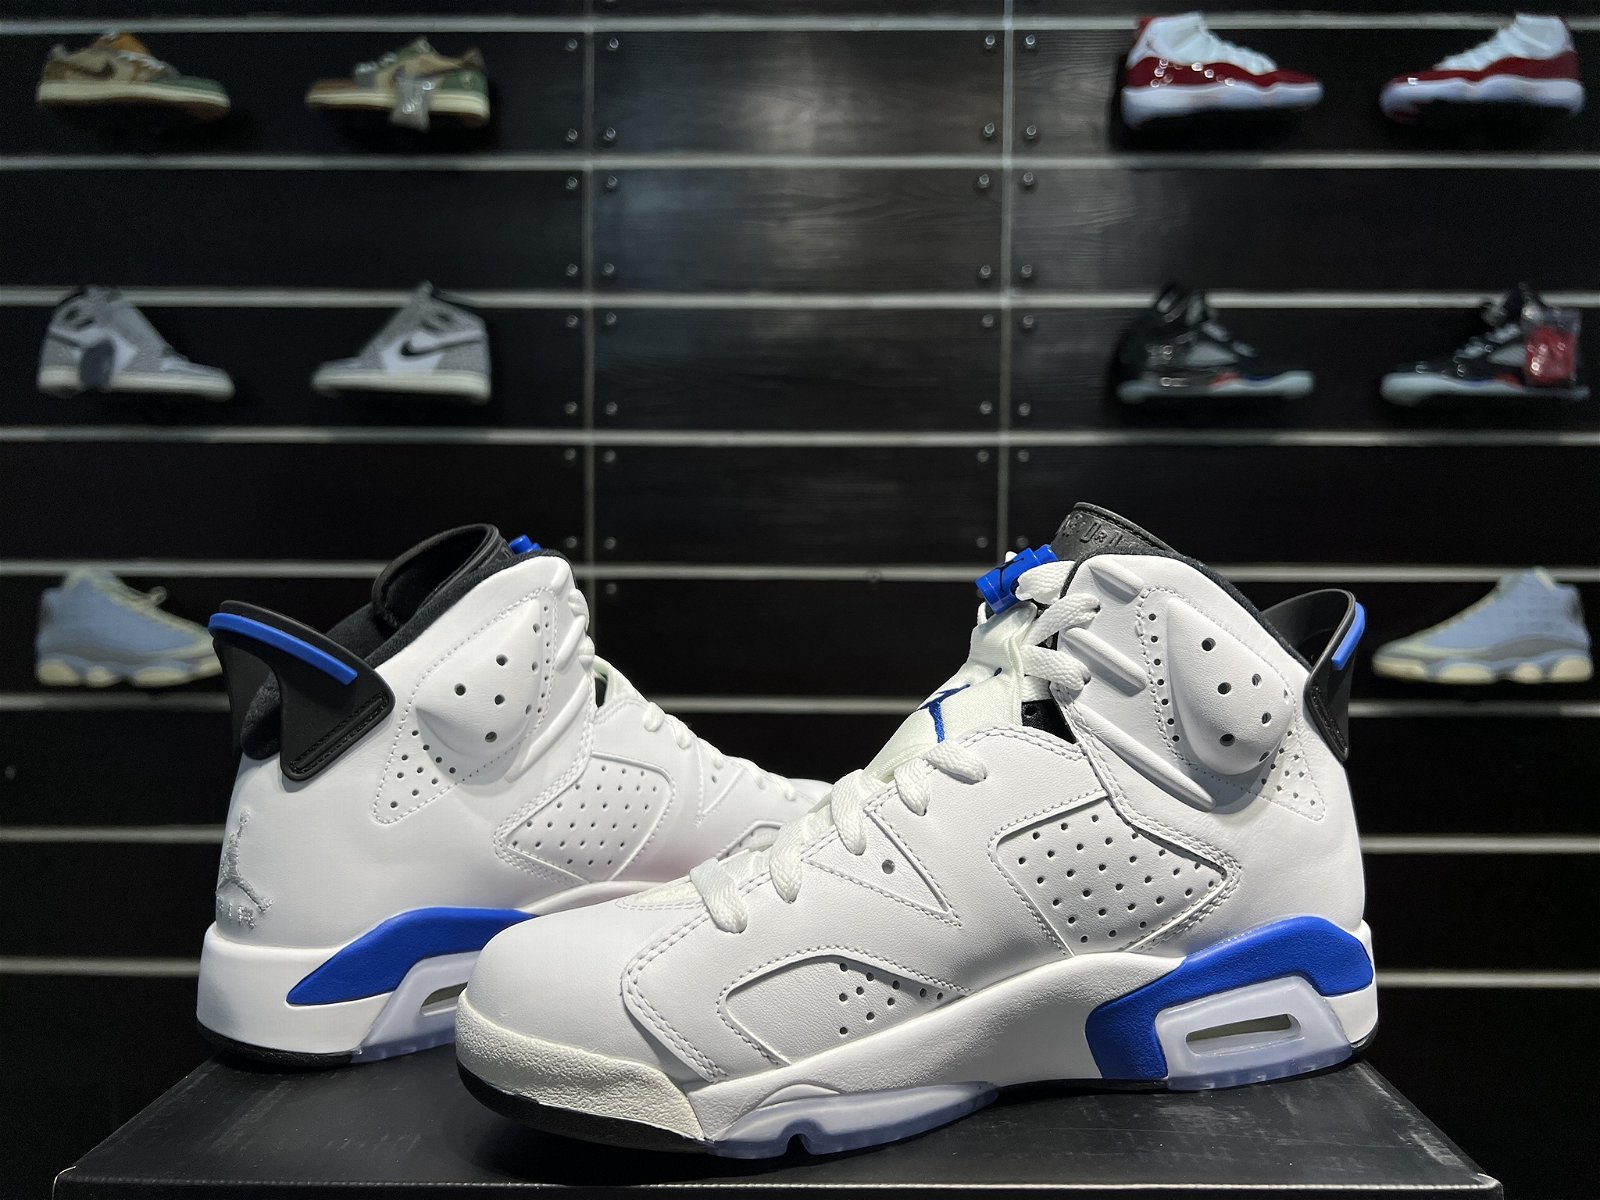 AJ 6 "Sport Blue" Sports Blue/White Blue High Top Basketball Shoes Article Numbe 3